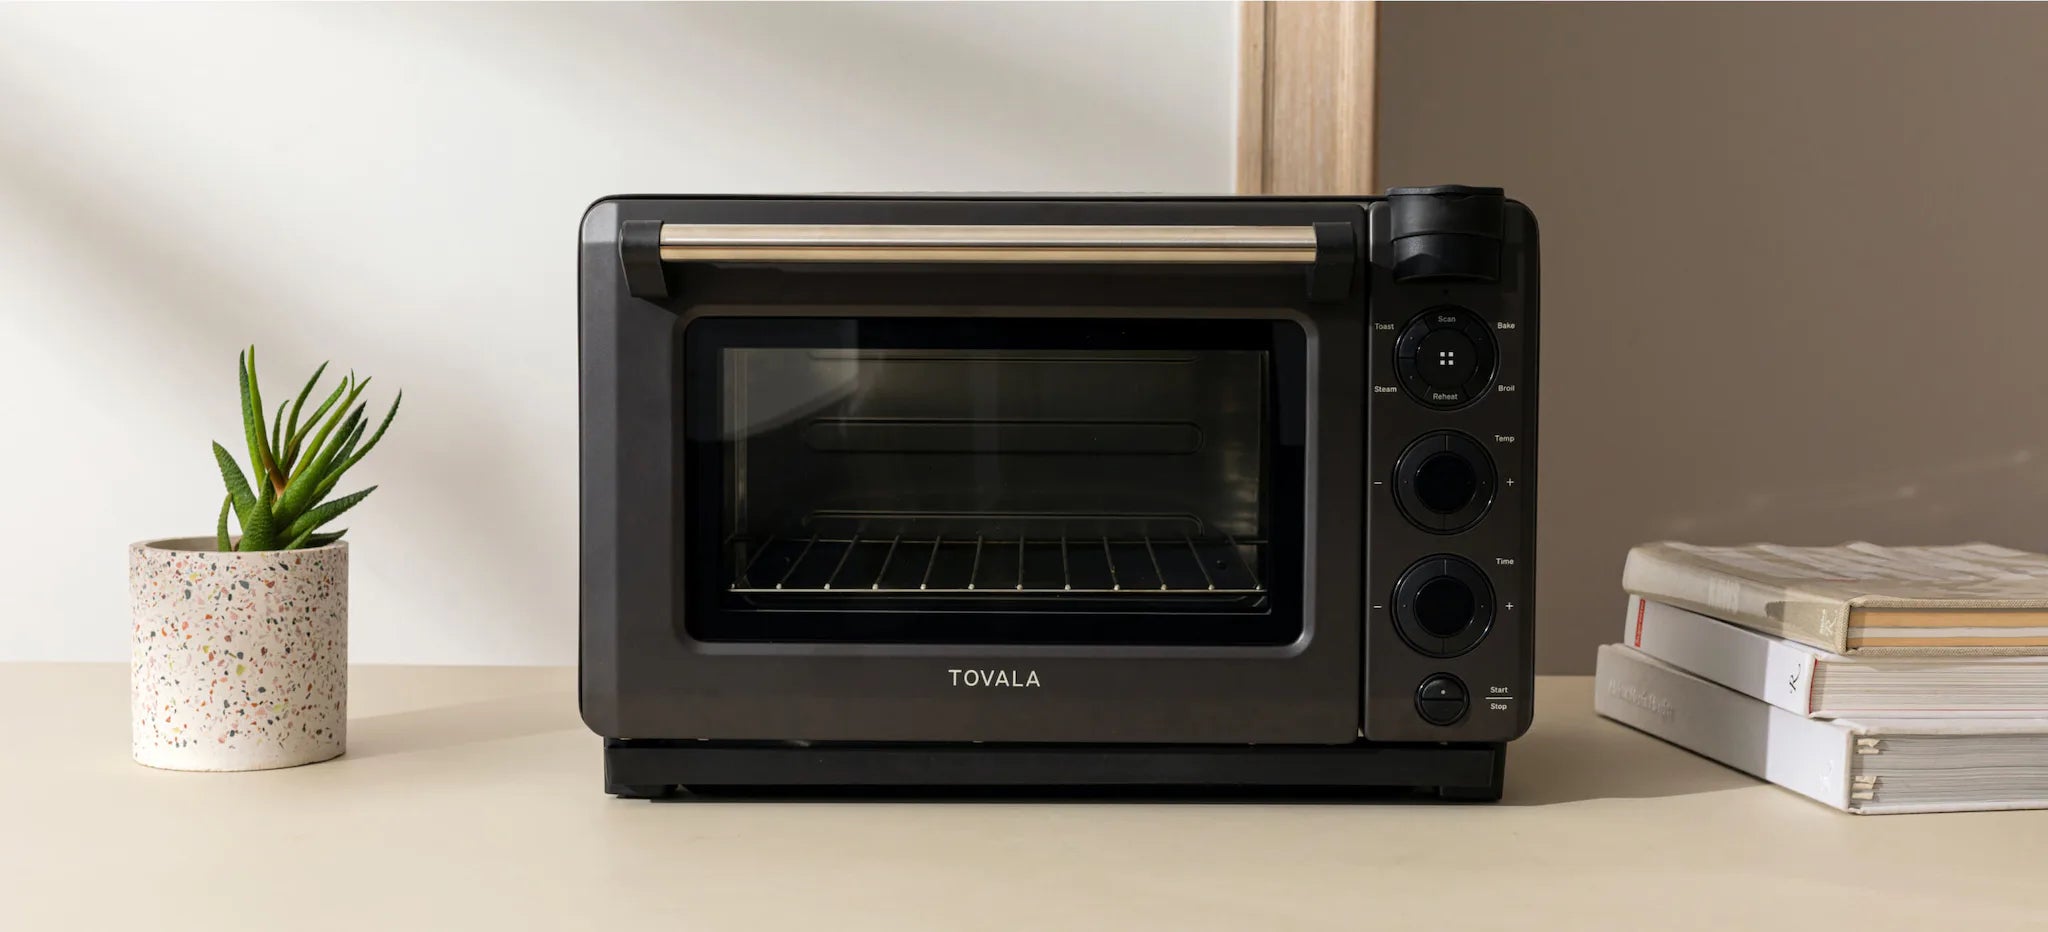 The Tovala Smart Oven Is the Best Kitchen Gift This Holiday Season 2022